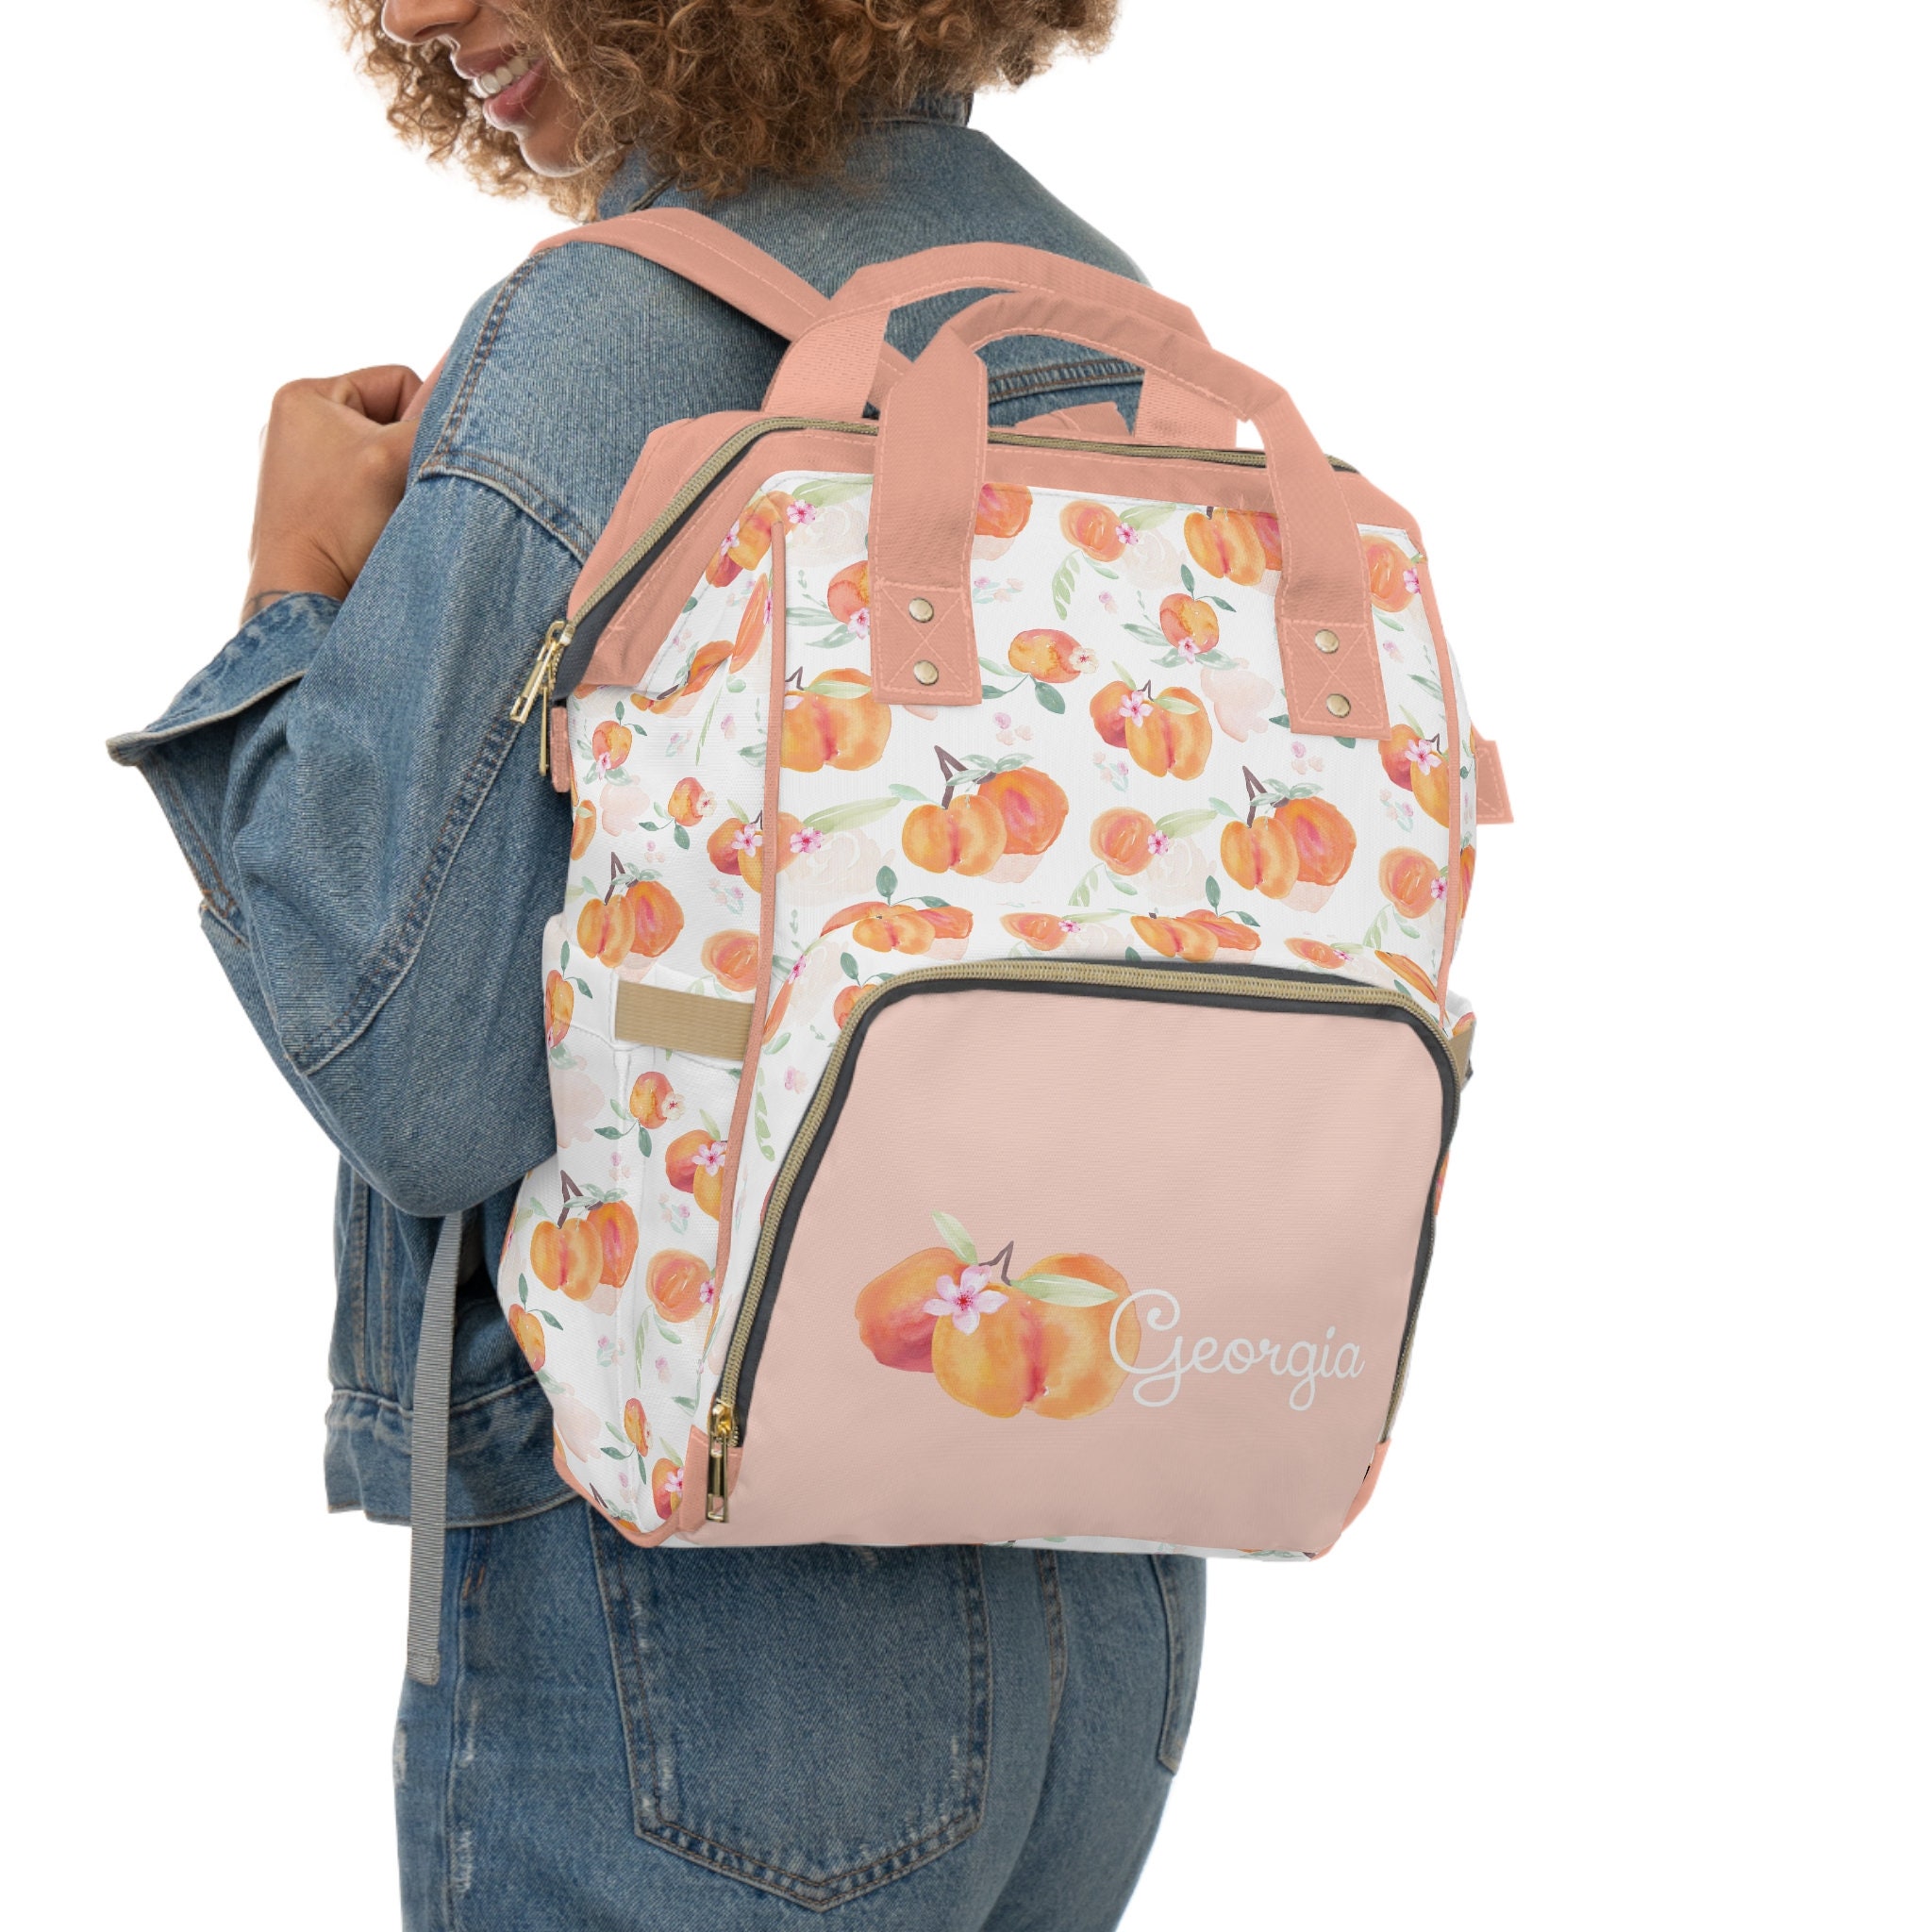 Buy Quality Baby Diaper Bags Online In Pakistan At